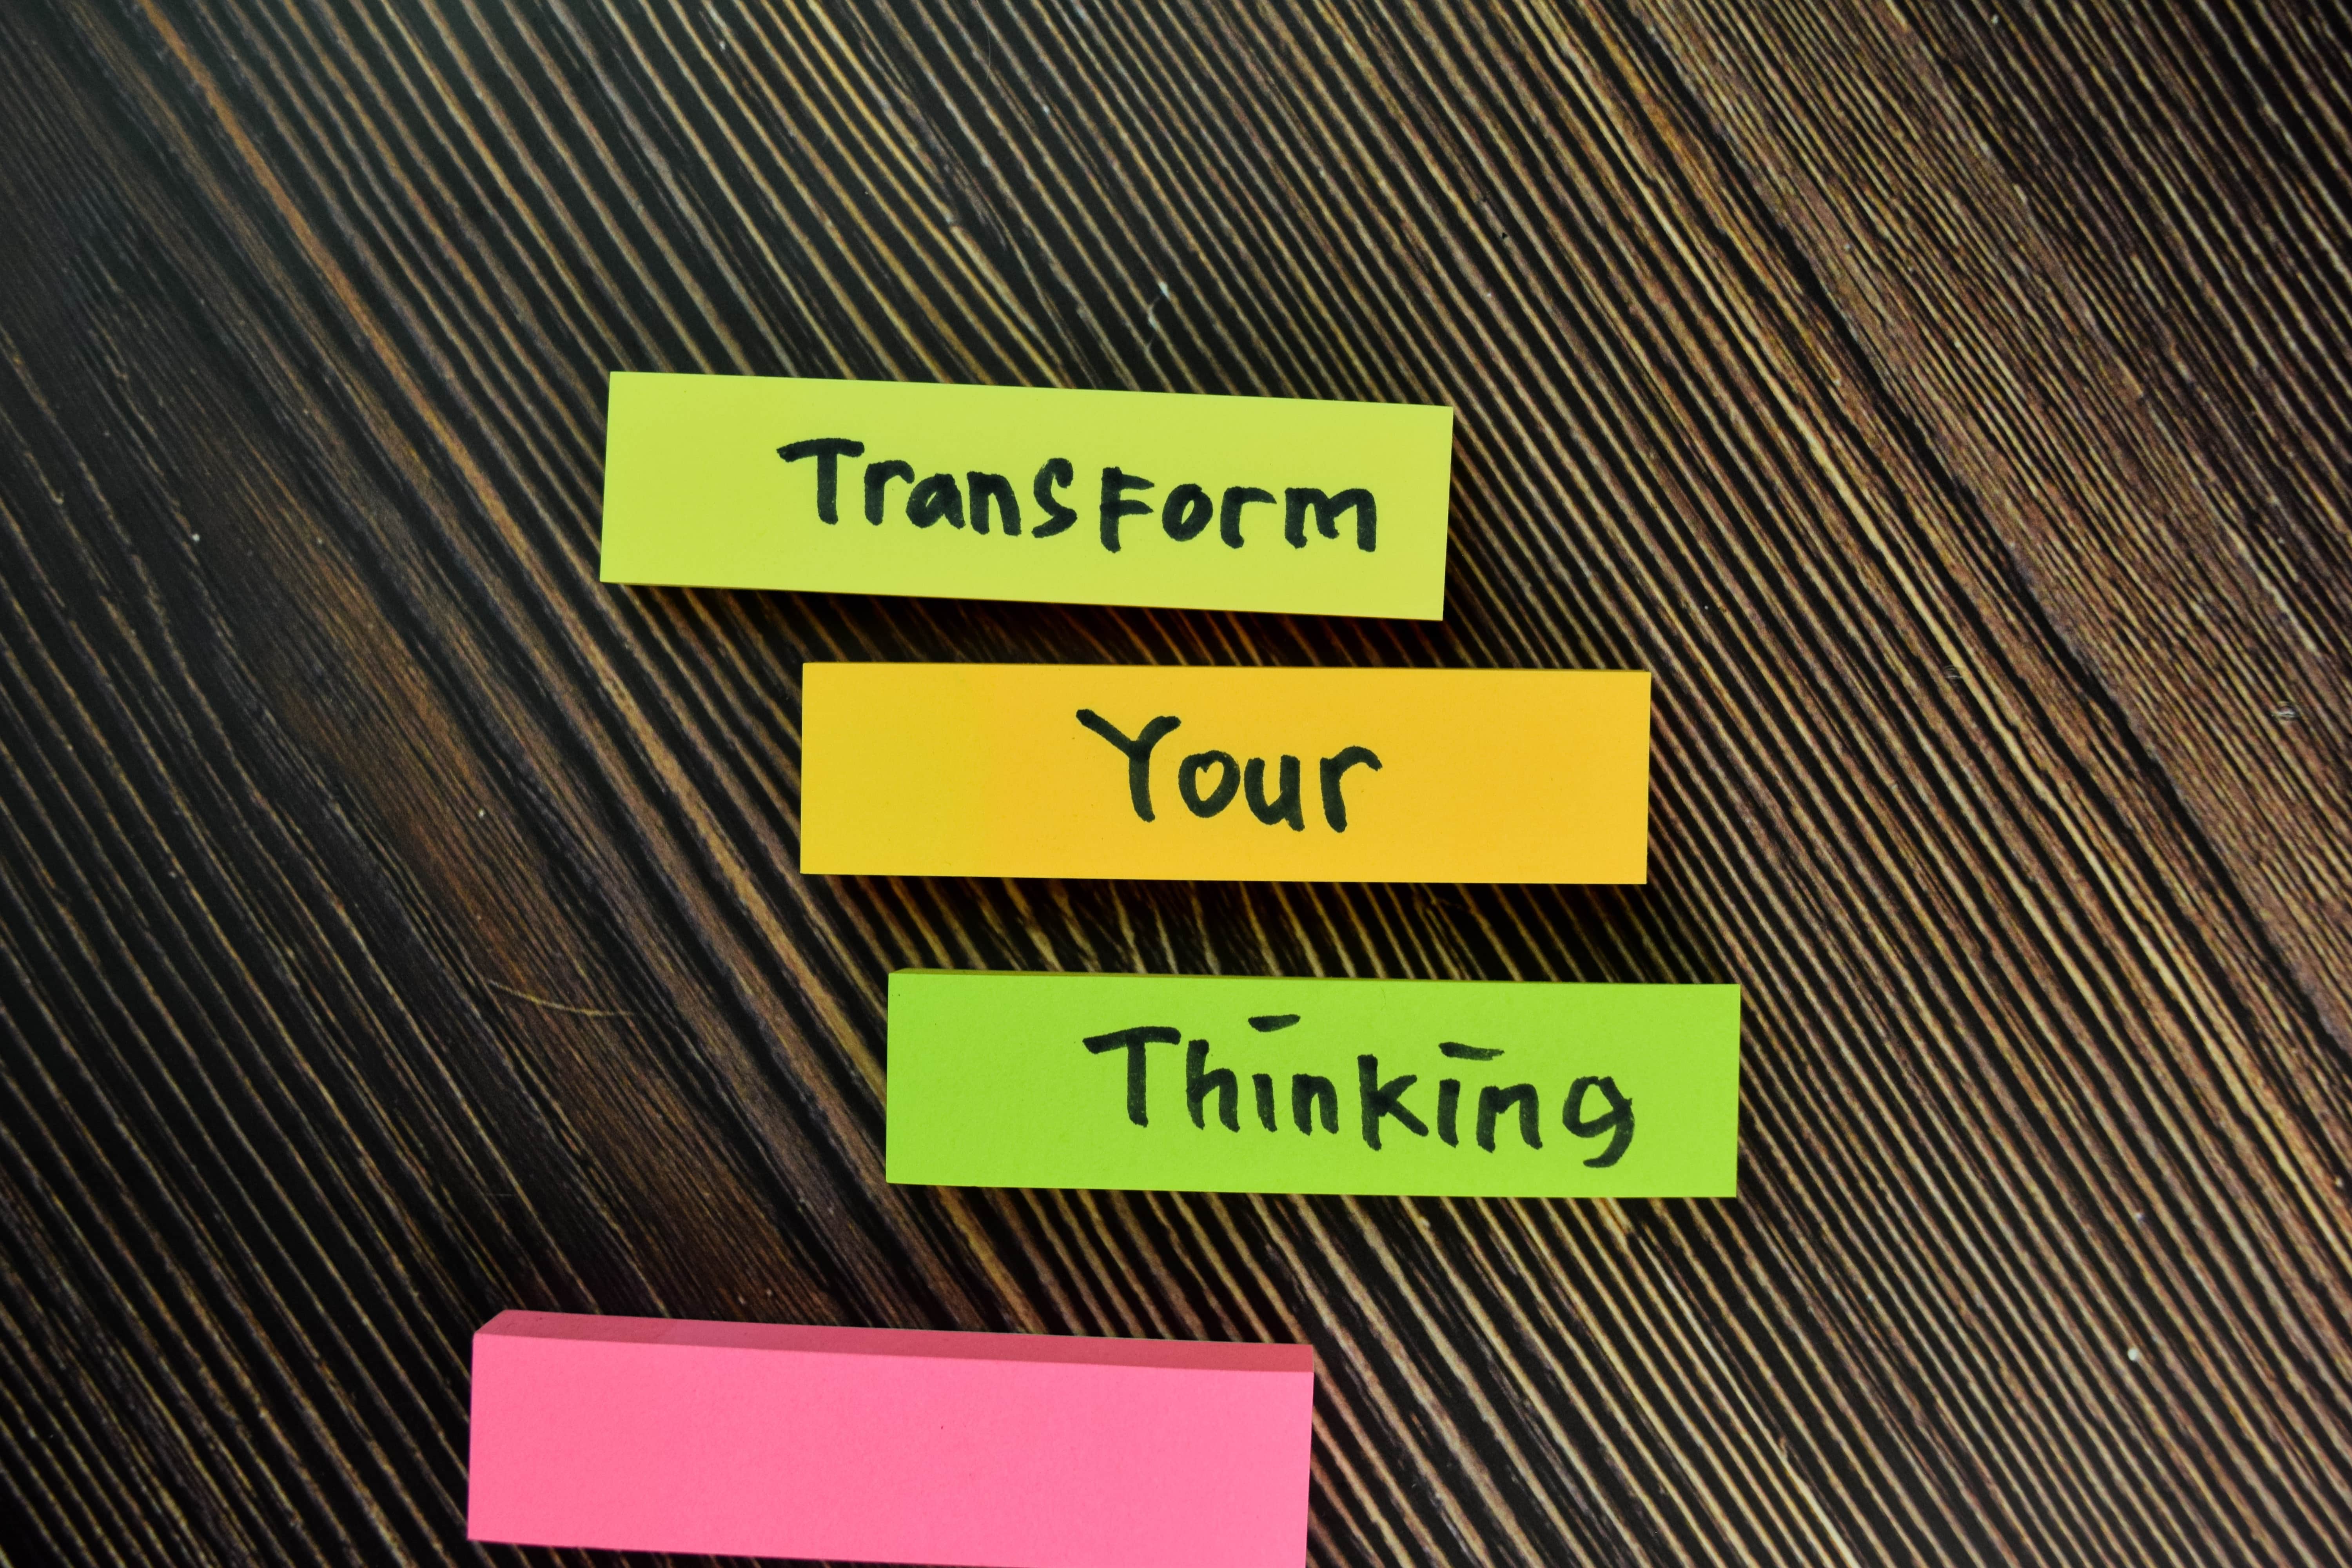 vecteezy_transform-your-thinking-written-on-small-notes-isolated-on-wooden-table_2219931-min